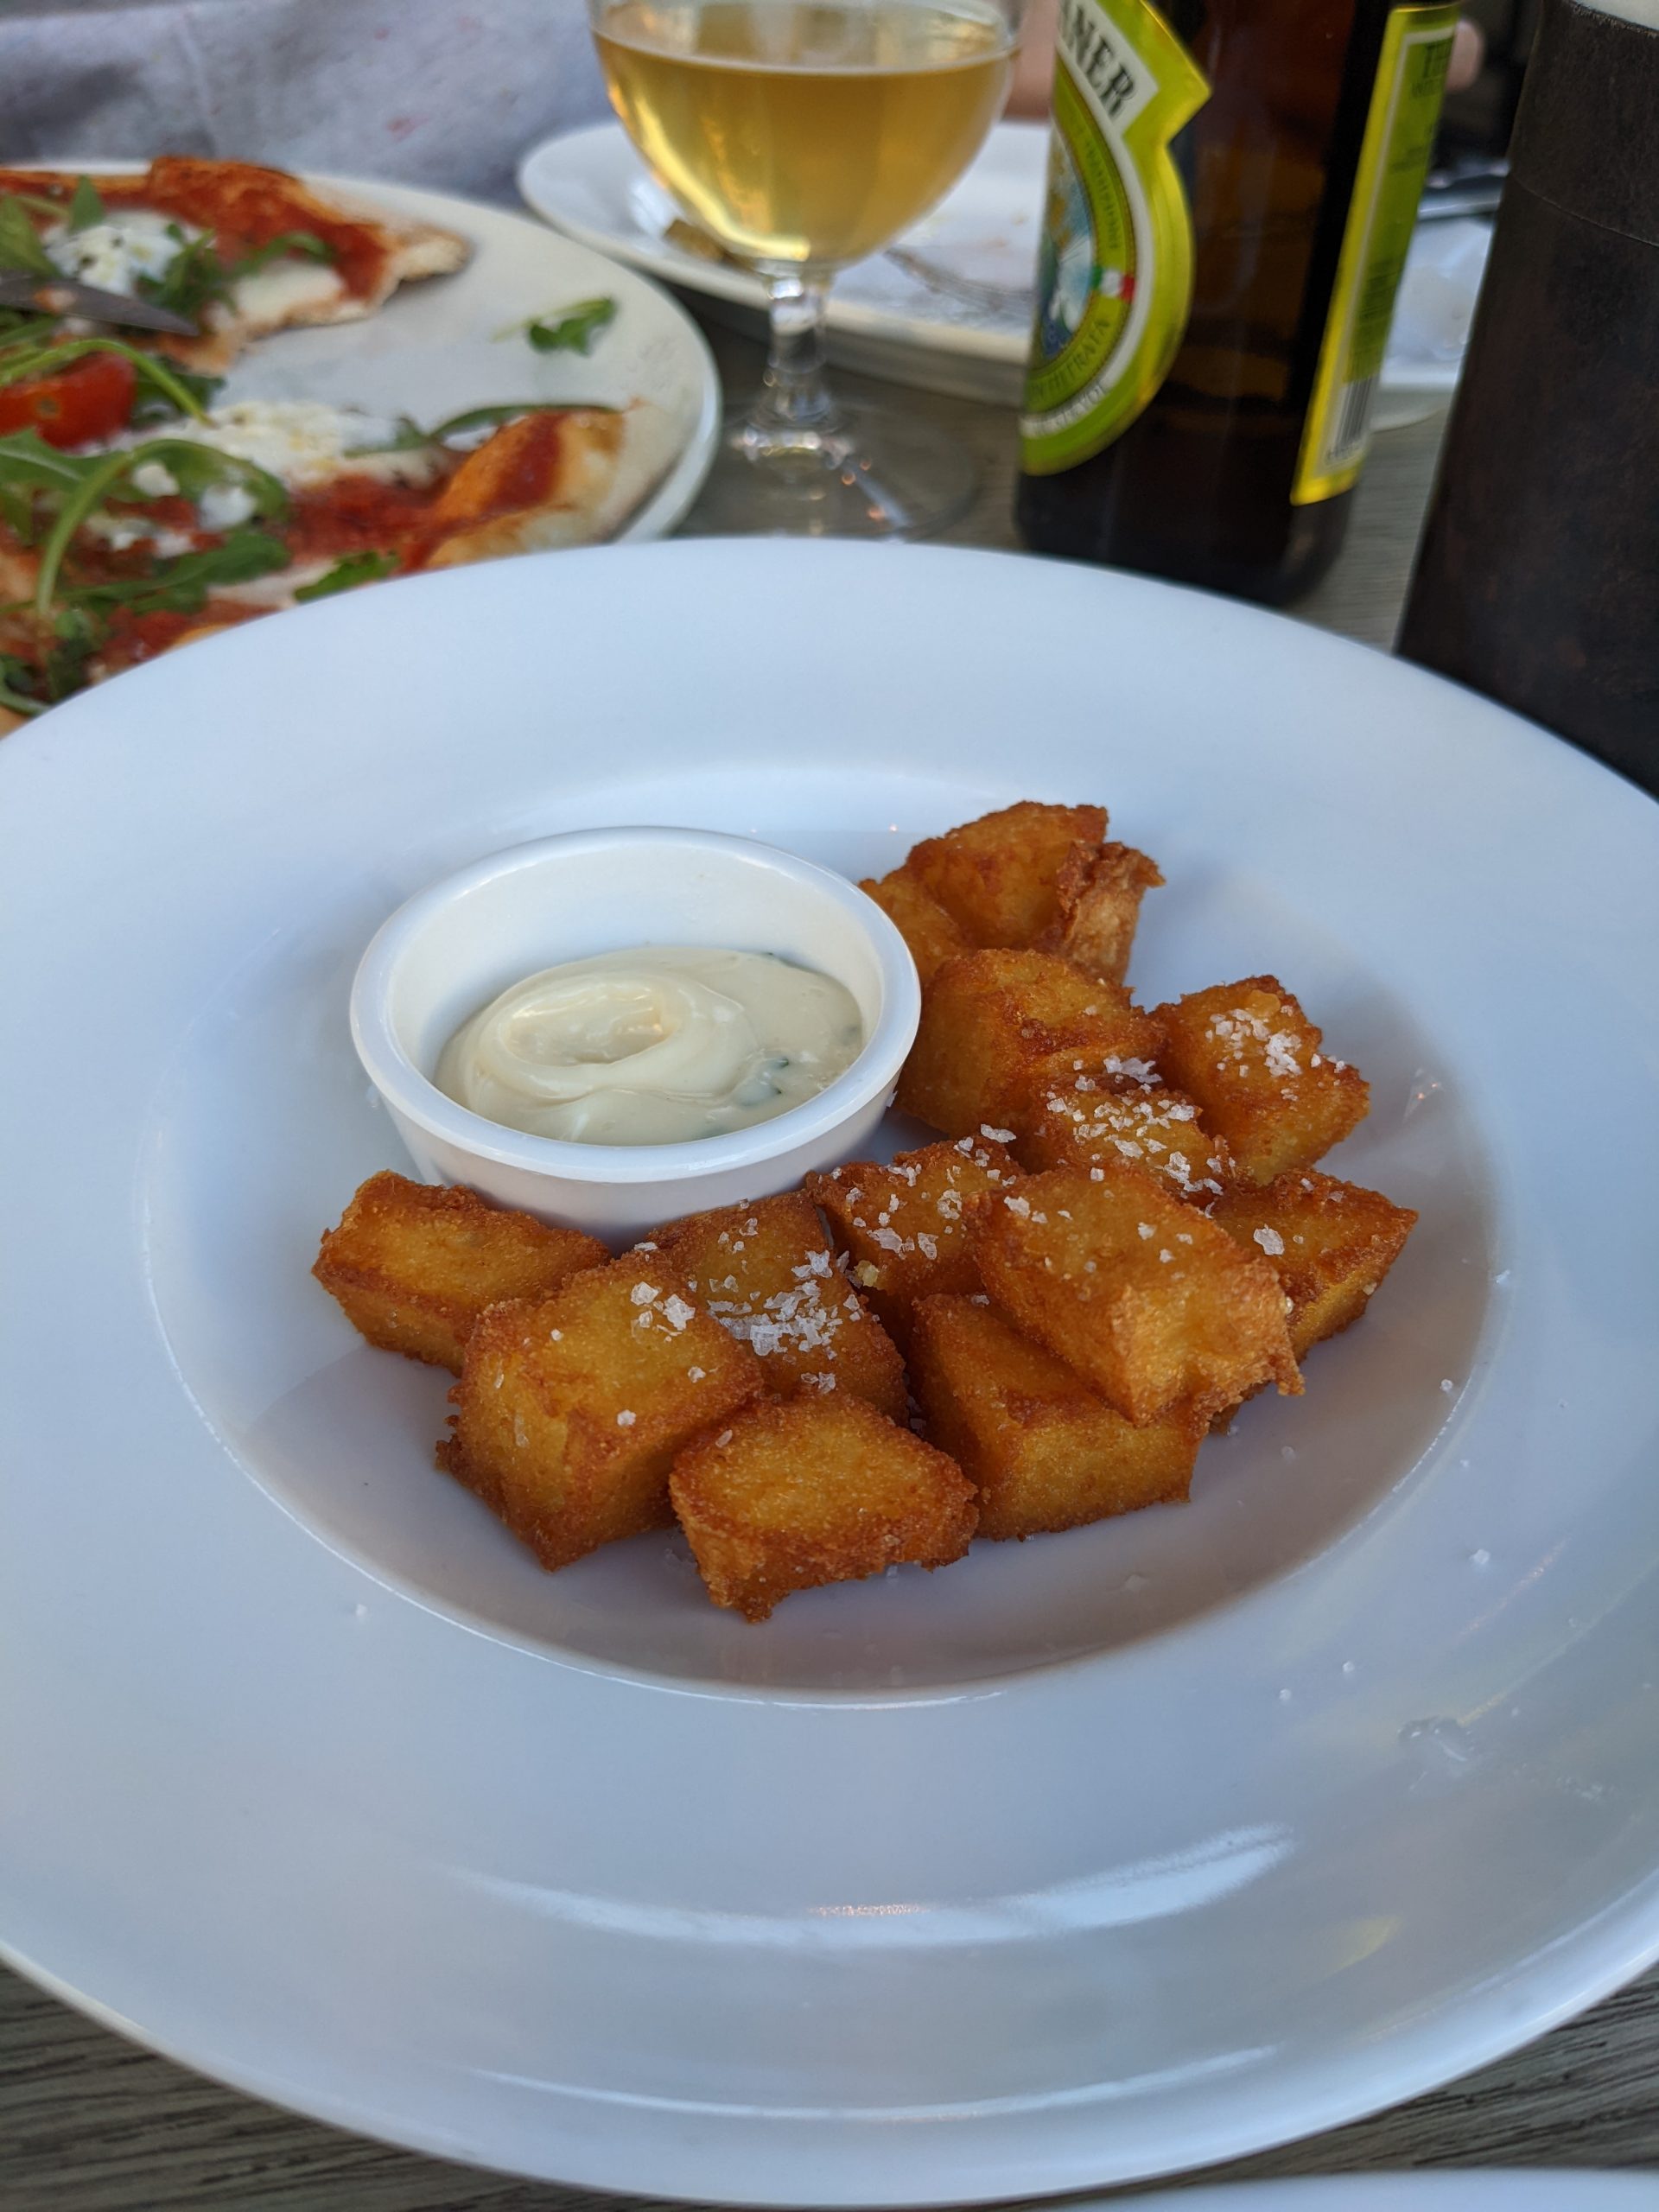 A plate of fried polenta with a dish of dipping sauce